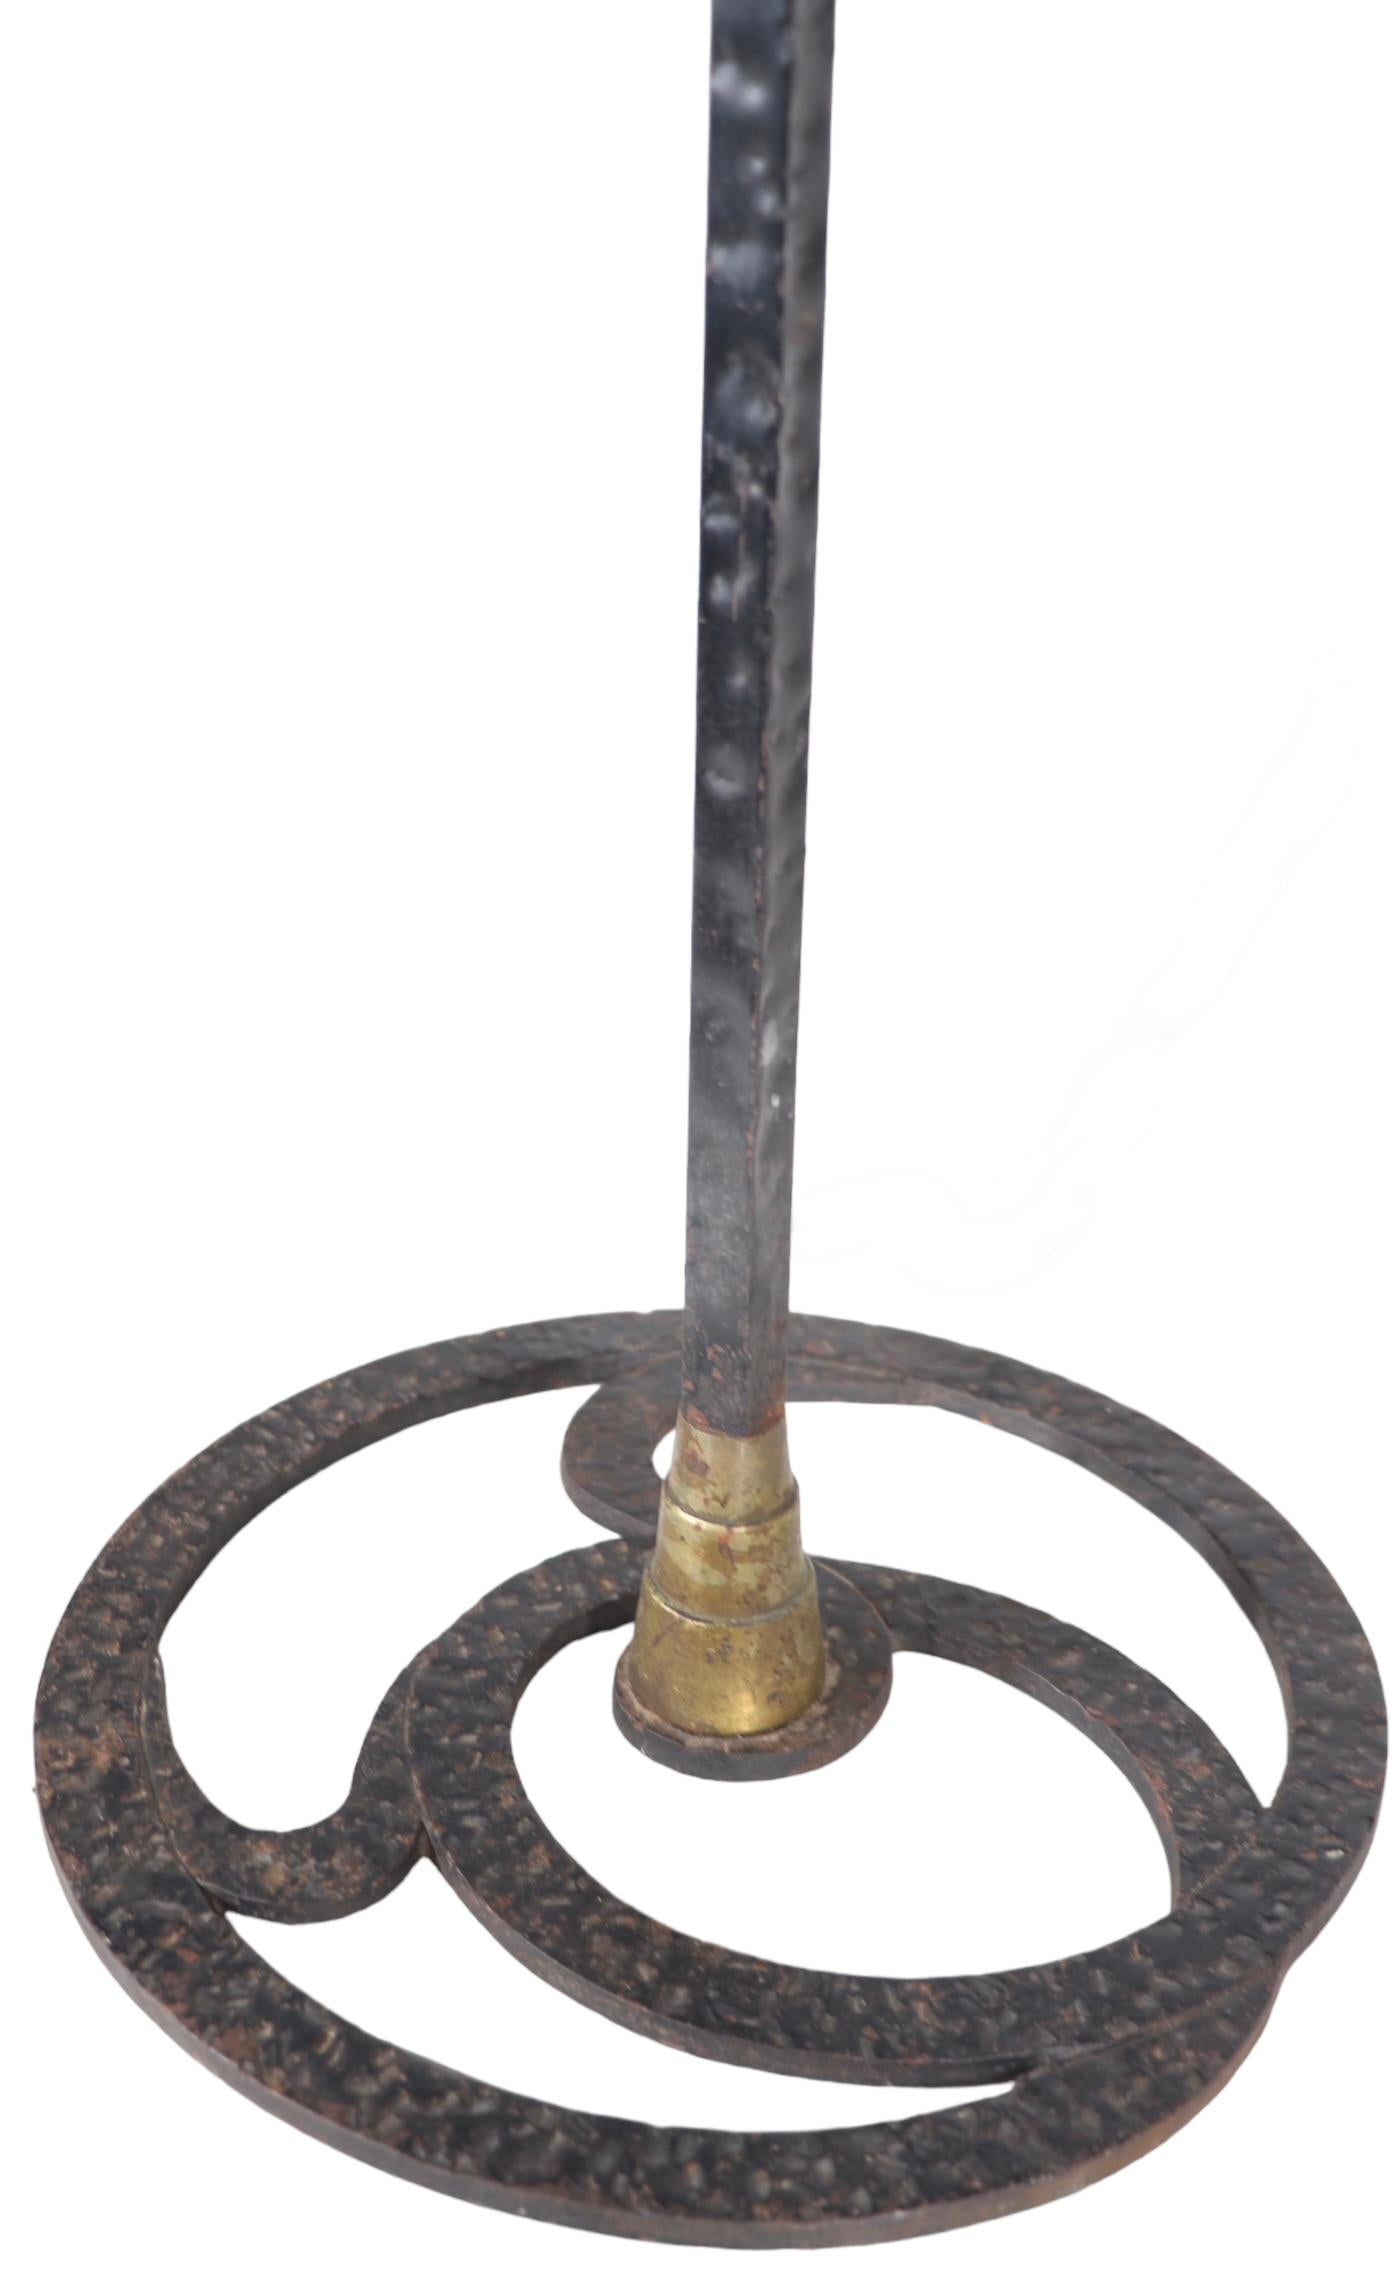  Art Deco Wrought Iron and Brass Floor lamp after Brandt, Bach c. 1920/1930's For Sale 8